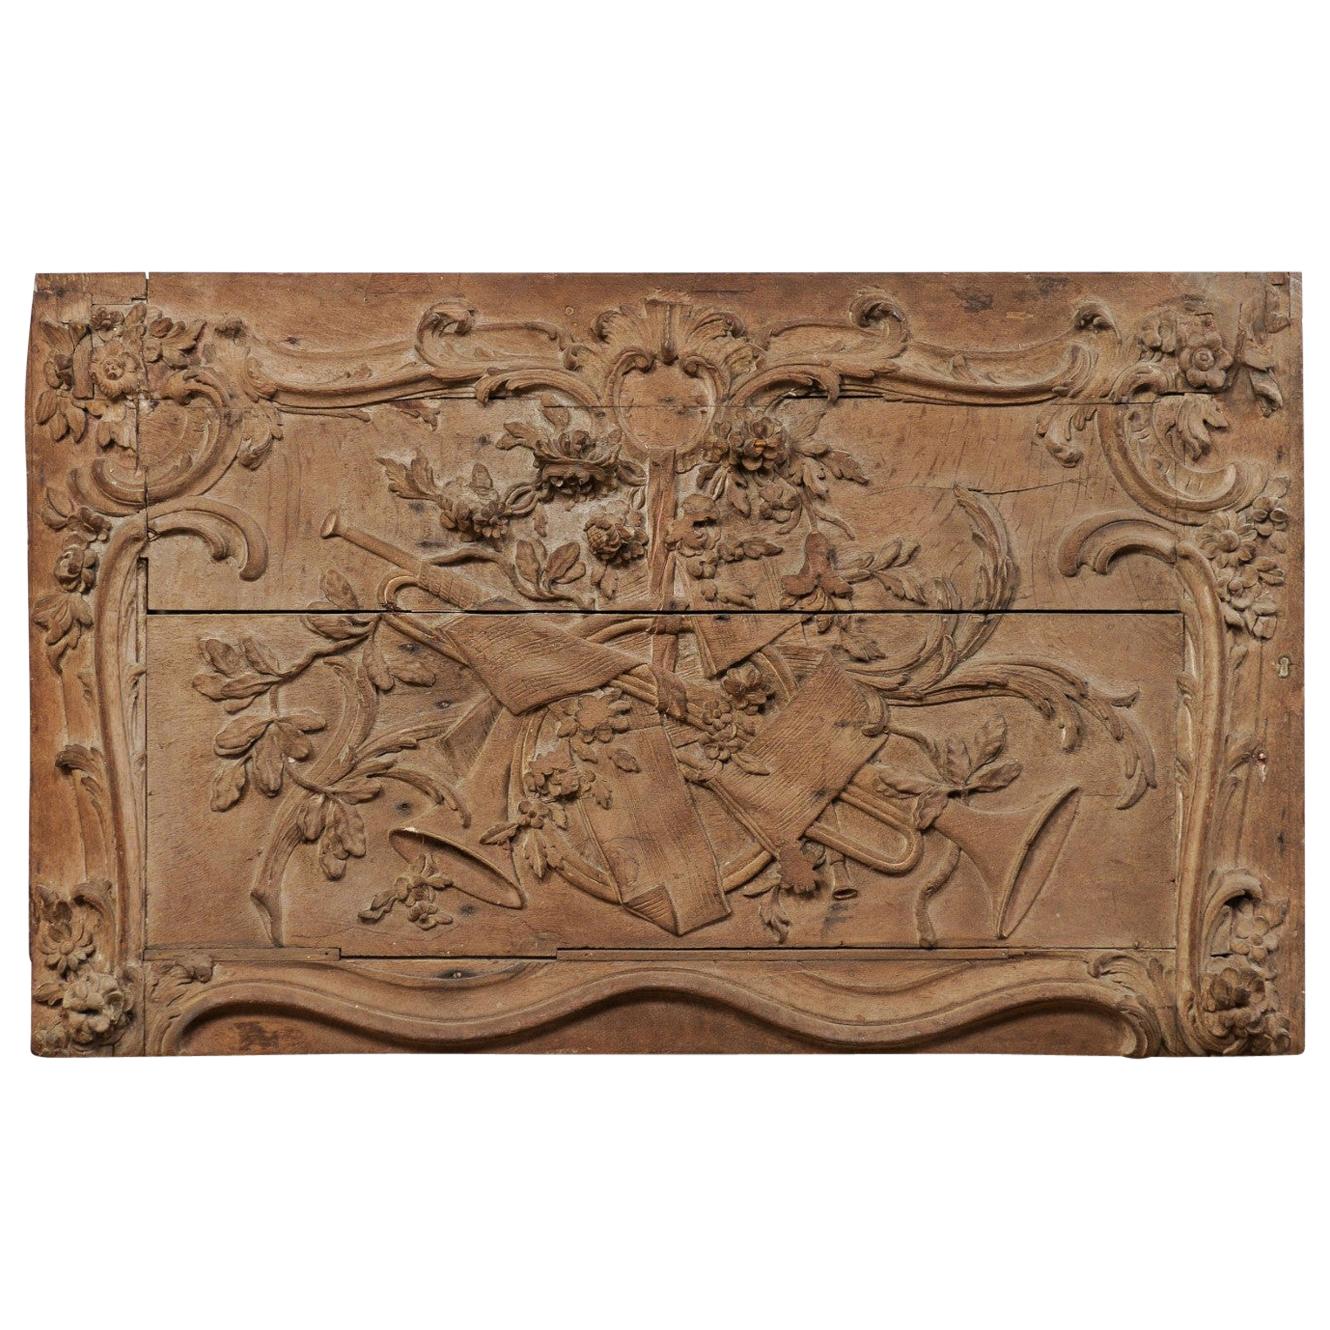 18th Century French Rectangular Wood Wall Decoration Carved in Musical Motif